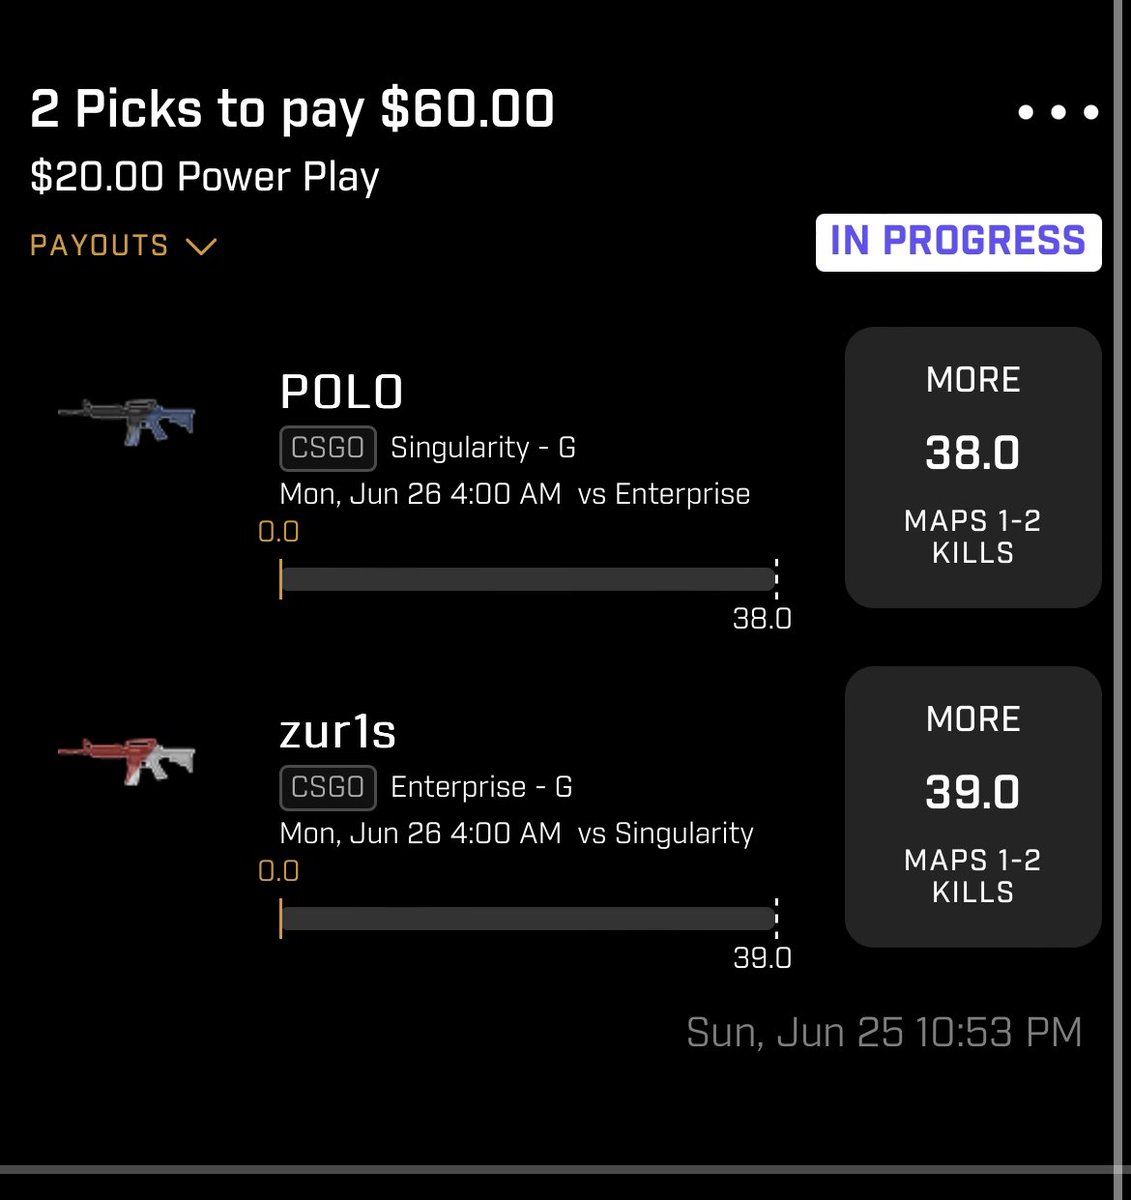 HERES A CSGO LOCK FOR YOU ALL!! 2 MAN FOR PRIZEPICKS COMMUNITY 🔥✅🔒 GOTTA GET A WIN WHILE OUT OF TOWN SO THIS GONNA BE THE ONE 😍 MAKE SURE YOU FOLLOW AND JOIN PREM TO SEE MORE #prizepicks #csgo #mlb #sports #betting #gamblingtwitter #fanduel #underdog #trending #Russia #india